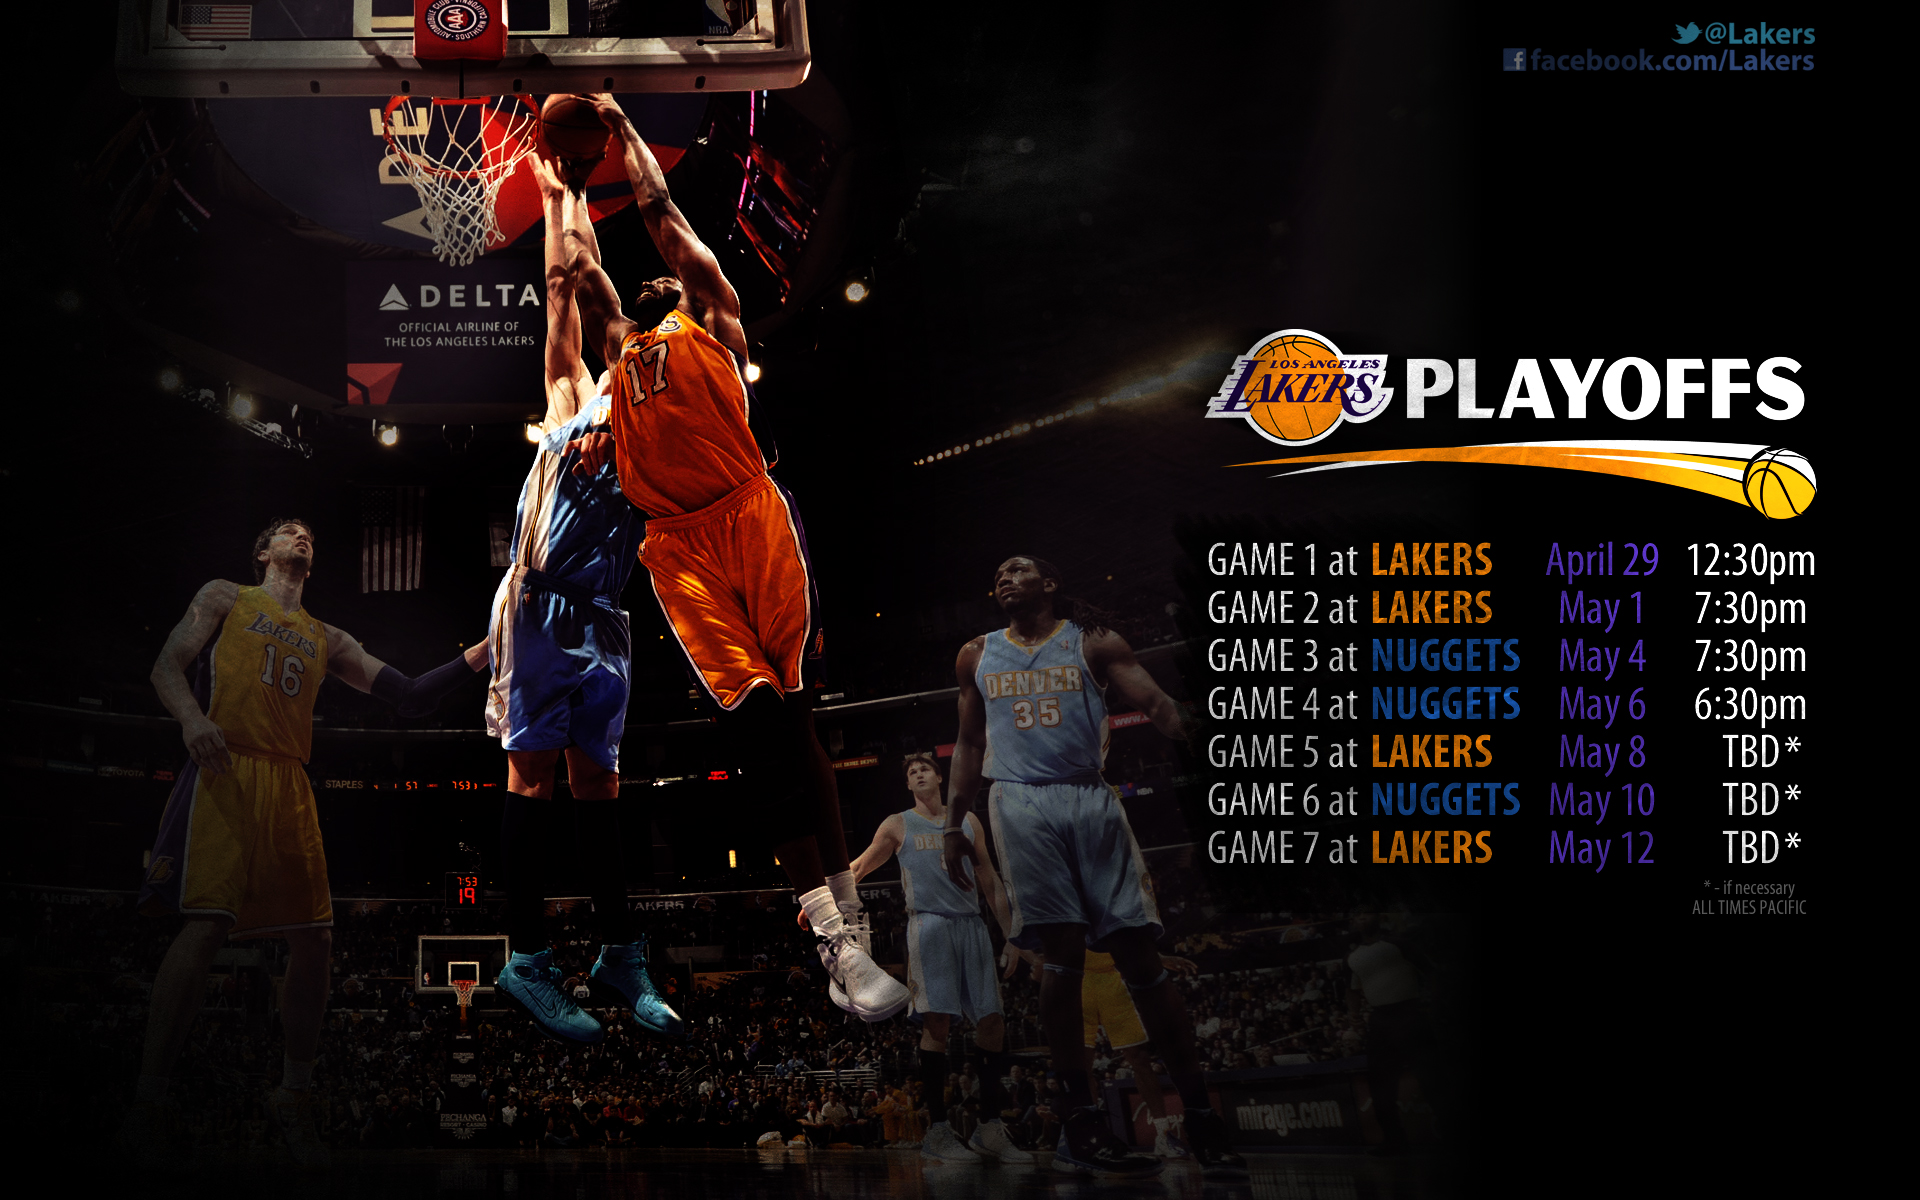 Lakers Desktop Wallpapers 2011-12 | THE OFFICIAL SITE OF THE LOS ...